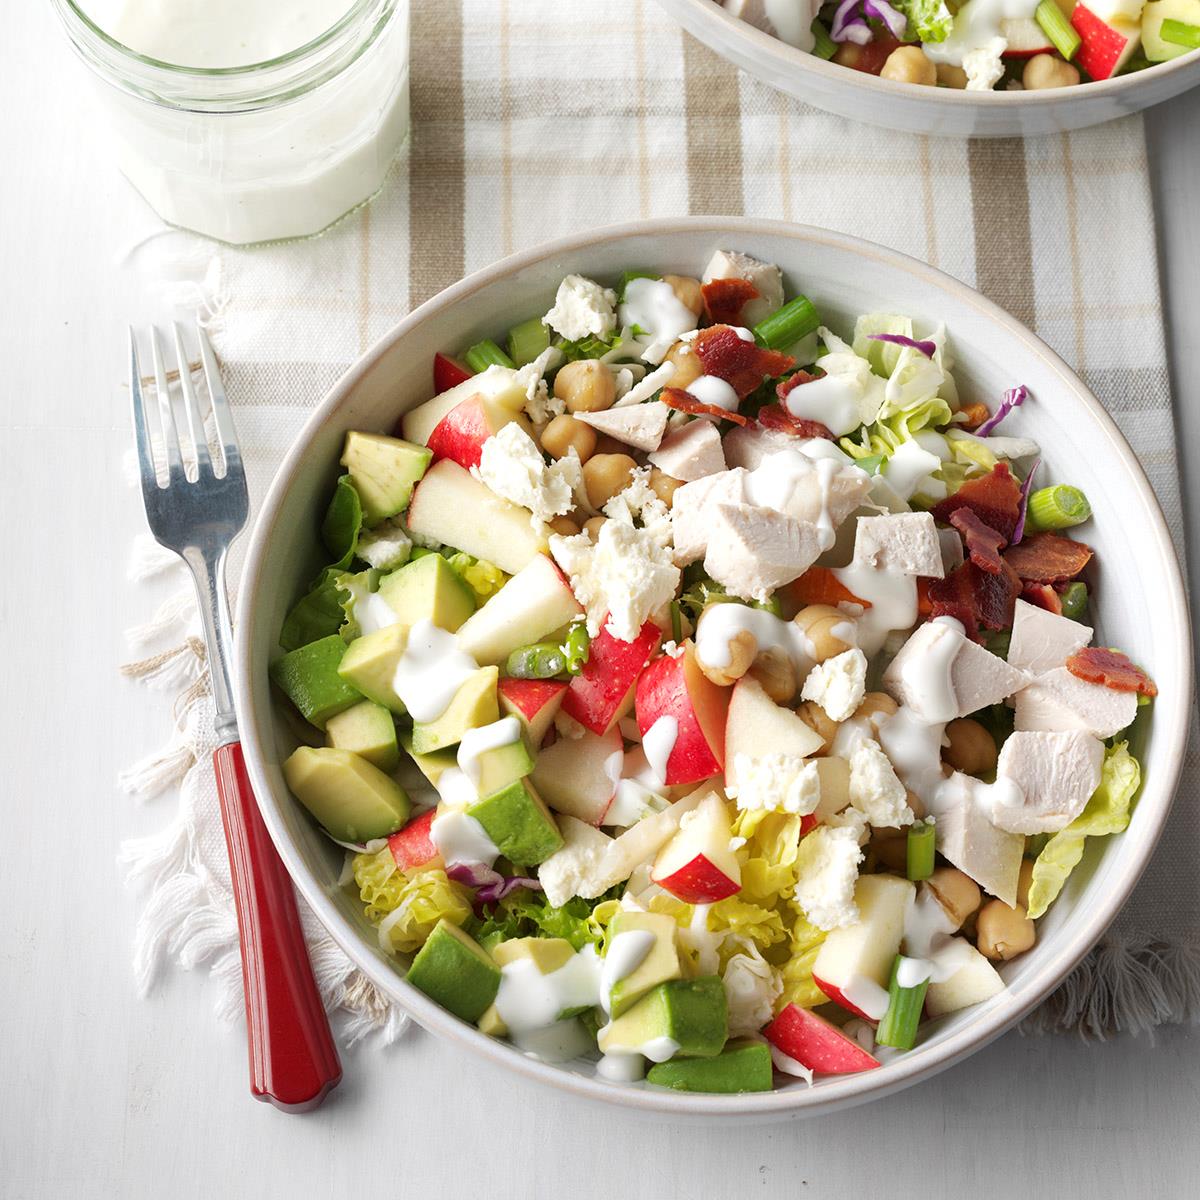 This "skinny" version of Cobb salad has all the taste and creaminess with half the fat and calories. You can skip the coleslaw mix and do all lettuce, but I like the crunch you get with cabbage. —Taylor Kiser, Brandon, Florida <a href="https://www.tasteofhome.com/recipes/skinny-cobb-salad/">Get Recipe</a>